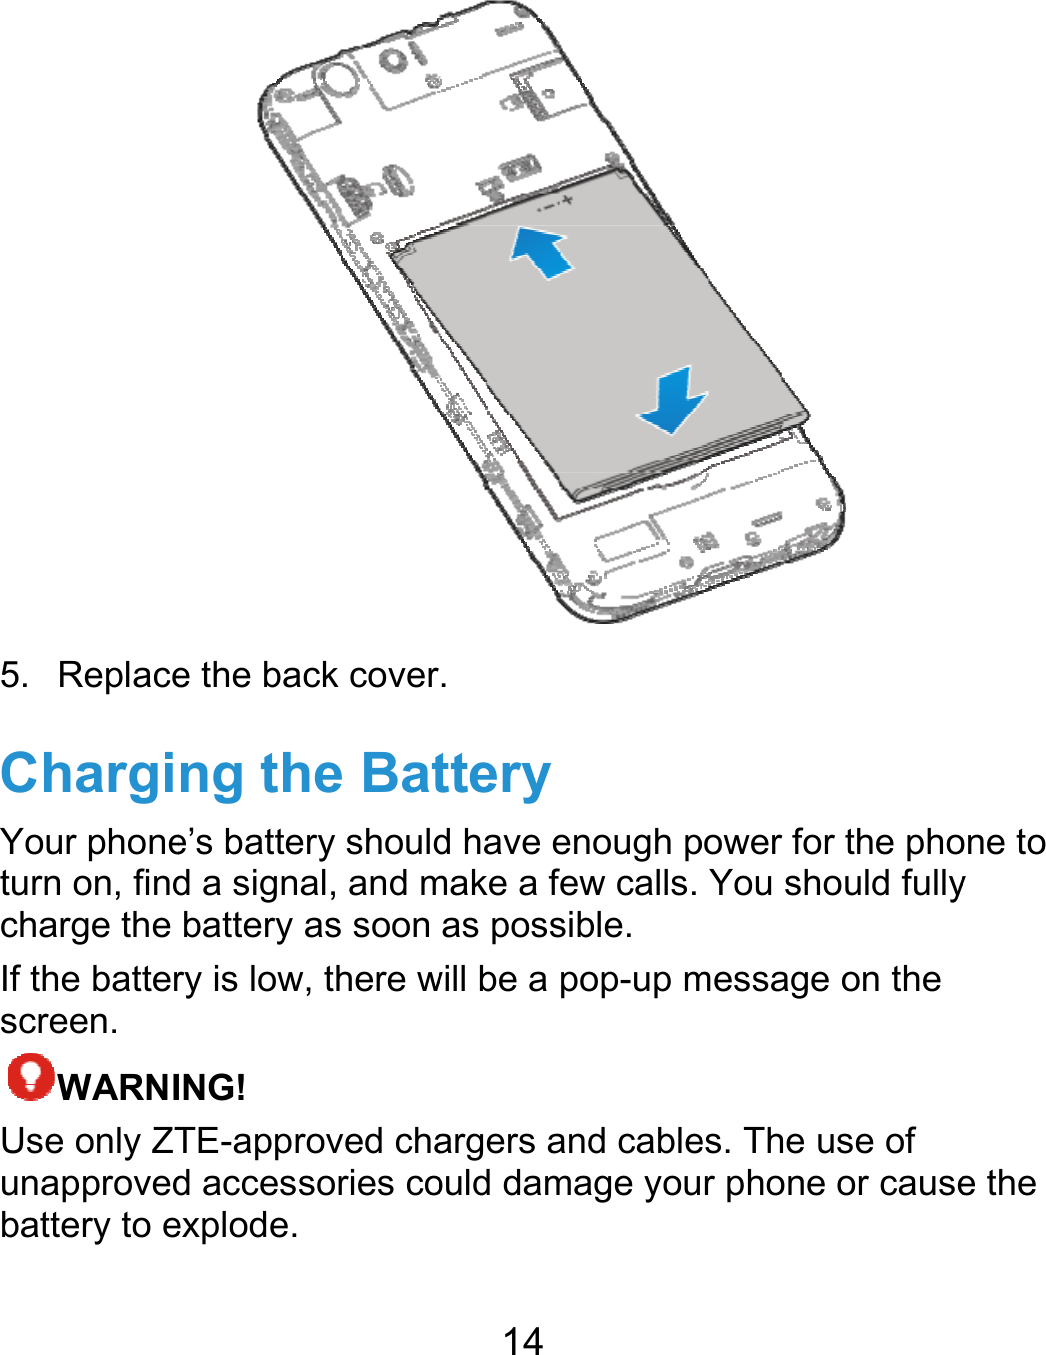  5. ReplaceChargiYour phoneturn on, findcharge the If the batterscreen. WARNIUse only ZTunapprovedbattery to ee the back coverng the Bate’s battery shouldd a signal, and mbattery as soon ry is low, there wING! TE-approved chad accessories coexplode. 14 . ttery d have enough pmake a few calls. as possible. will be a pop-up margers and cableould damage you power for the phoYou should fullymessage on the es. The use of r phone or causeone to y e the 